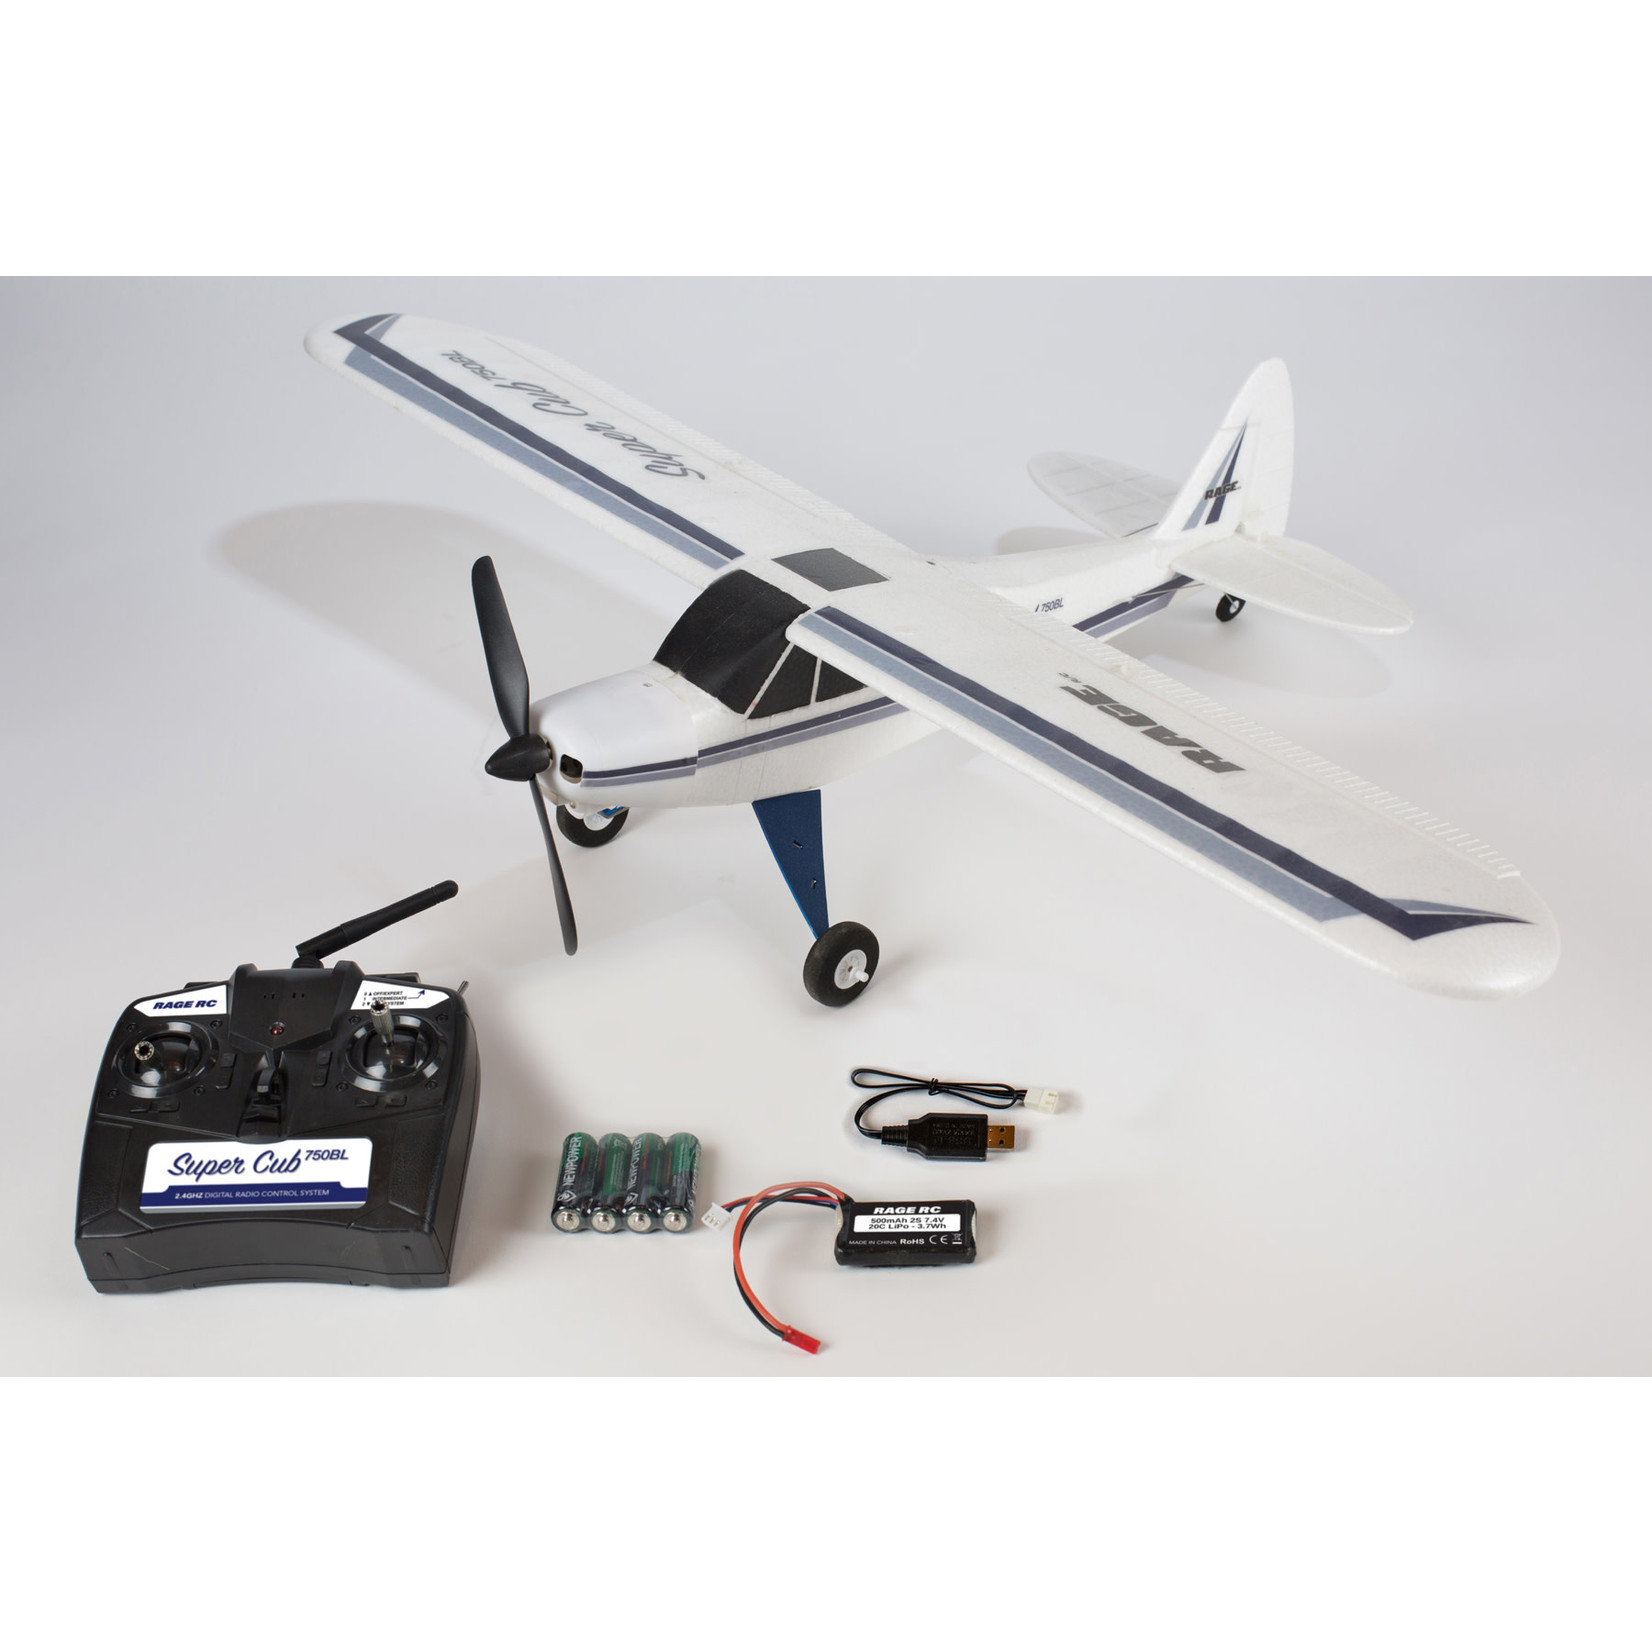 Rage RC Rage RC Super Cub 750 Brushless RTF 4-Channel Aircraft with PASS (Pilot Assist Stability Software) System #RGRA1500